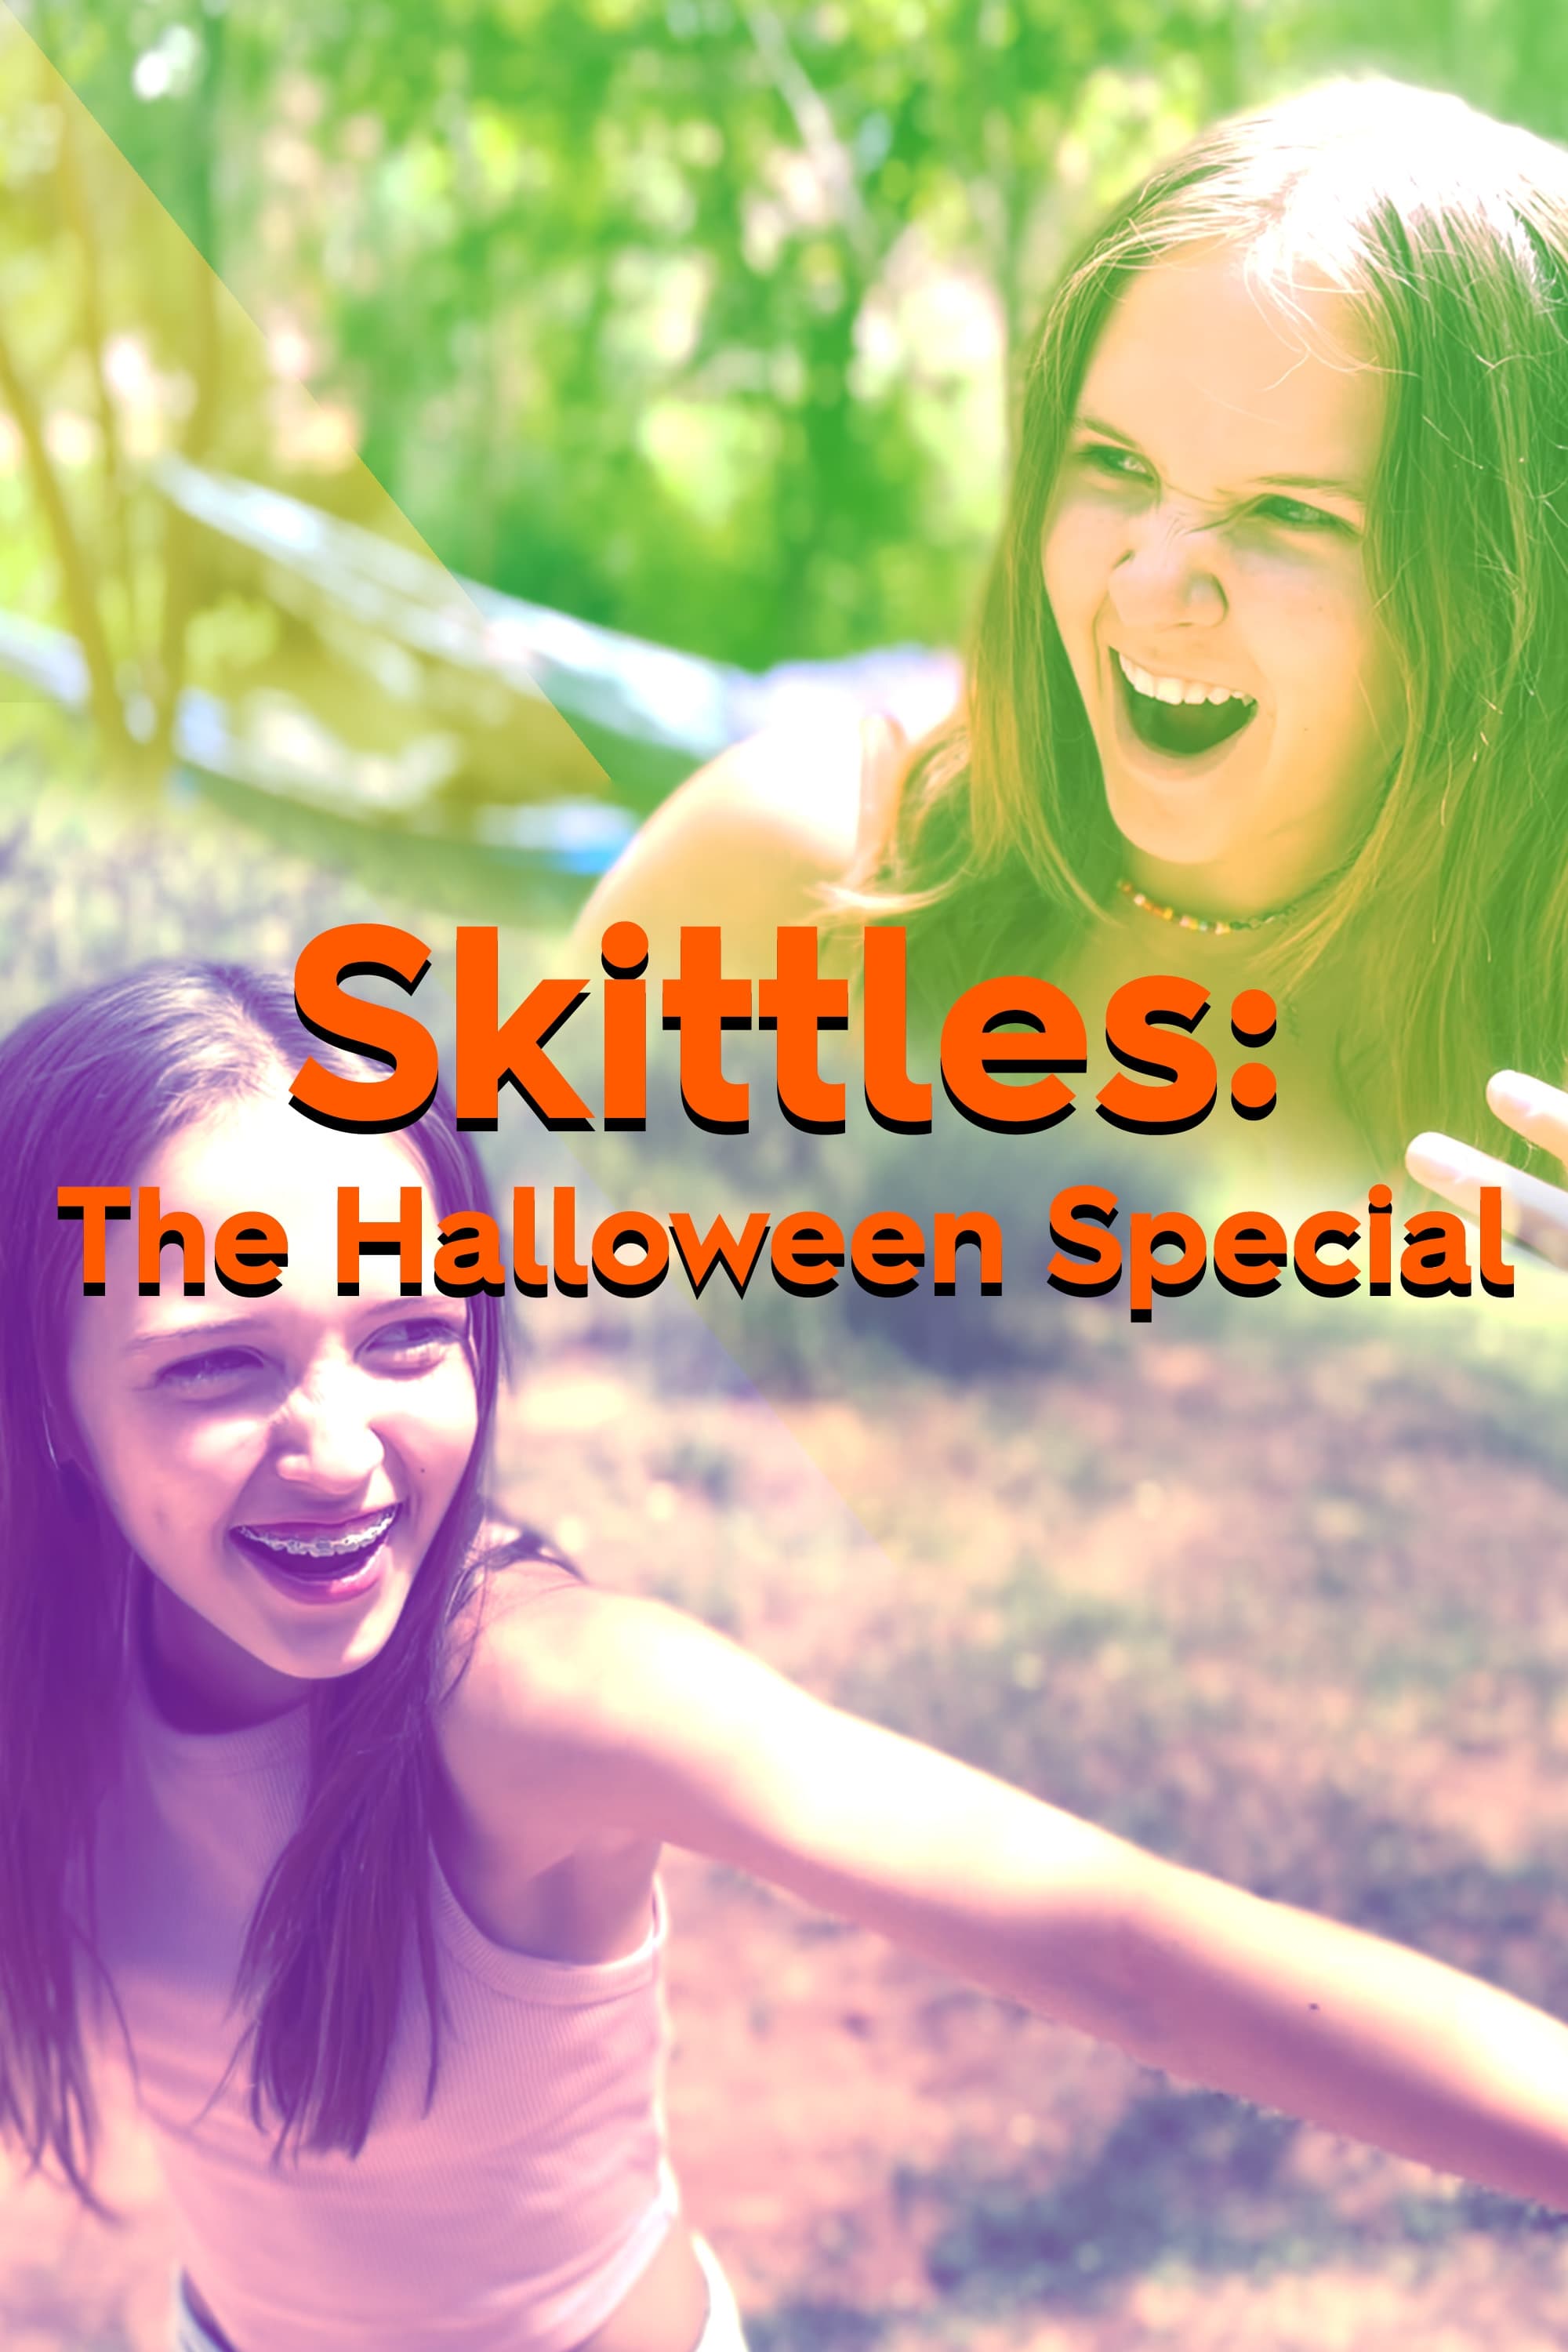 Skittles: The Halloween Special